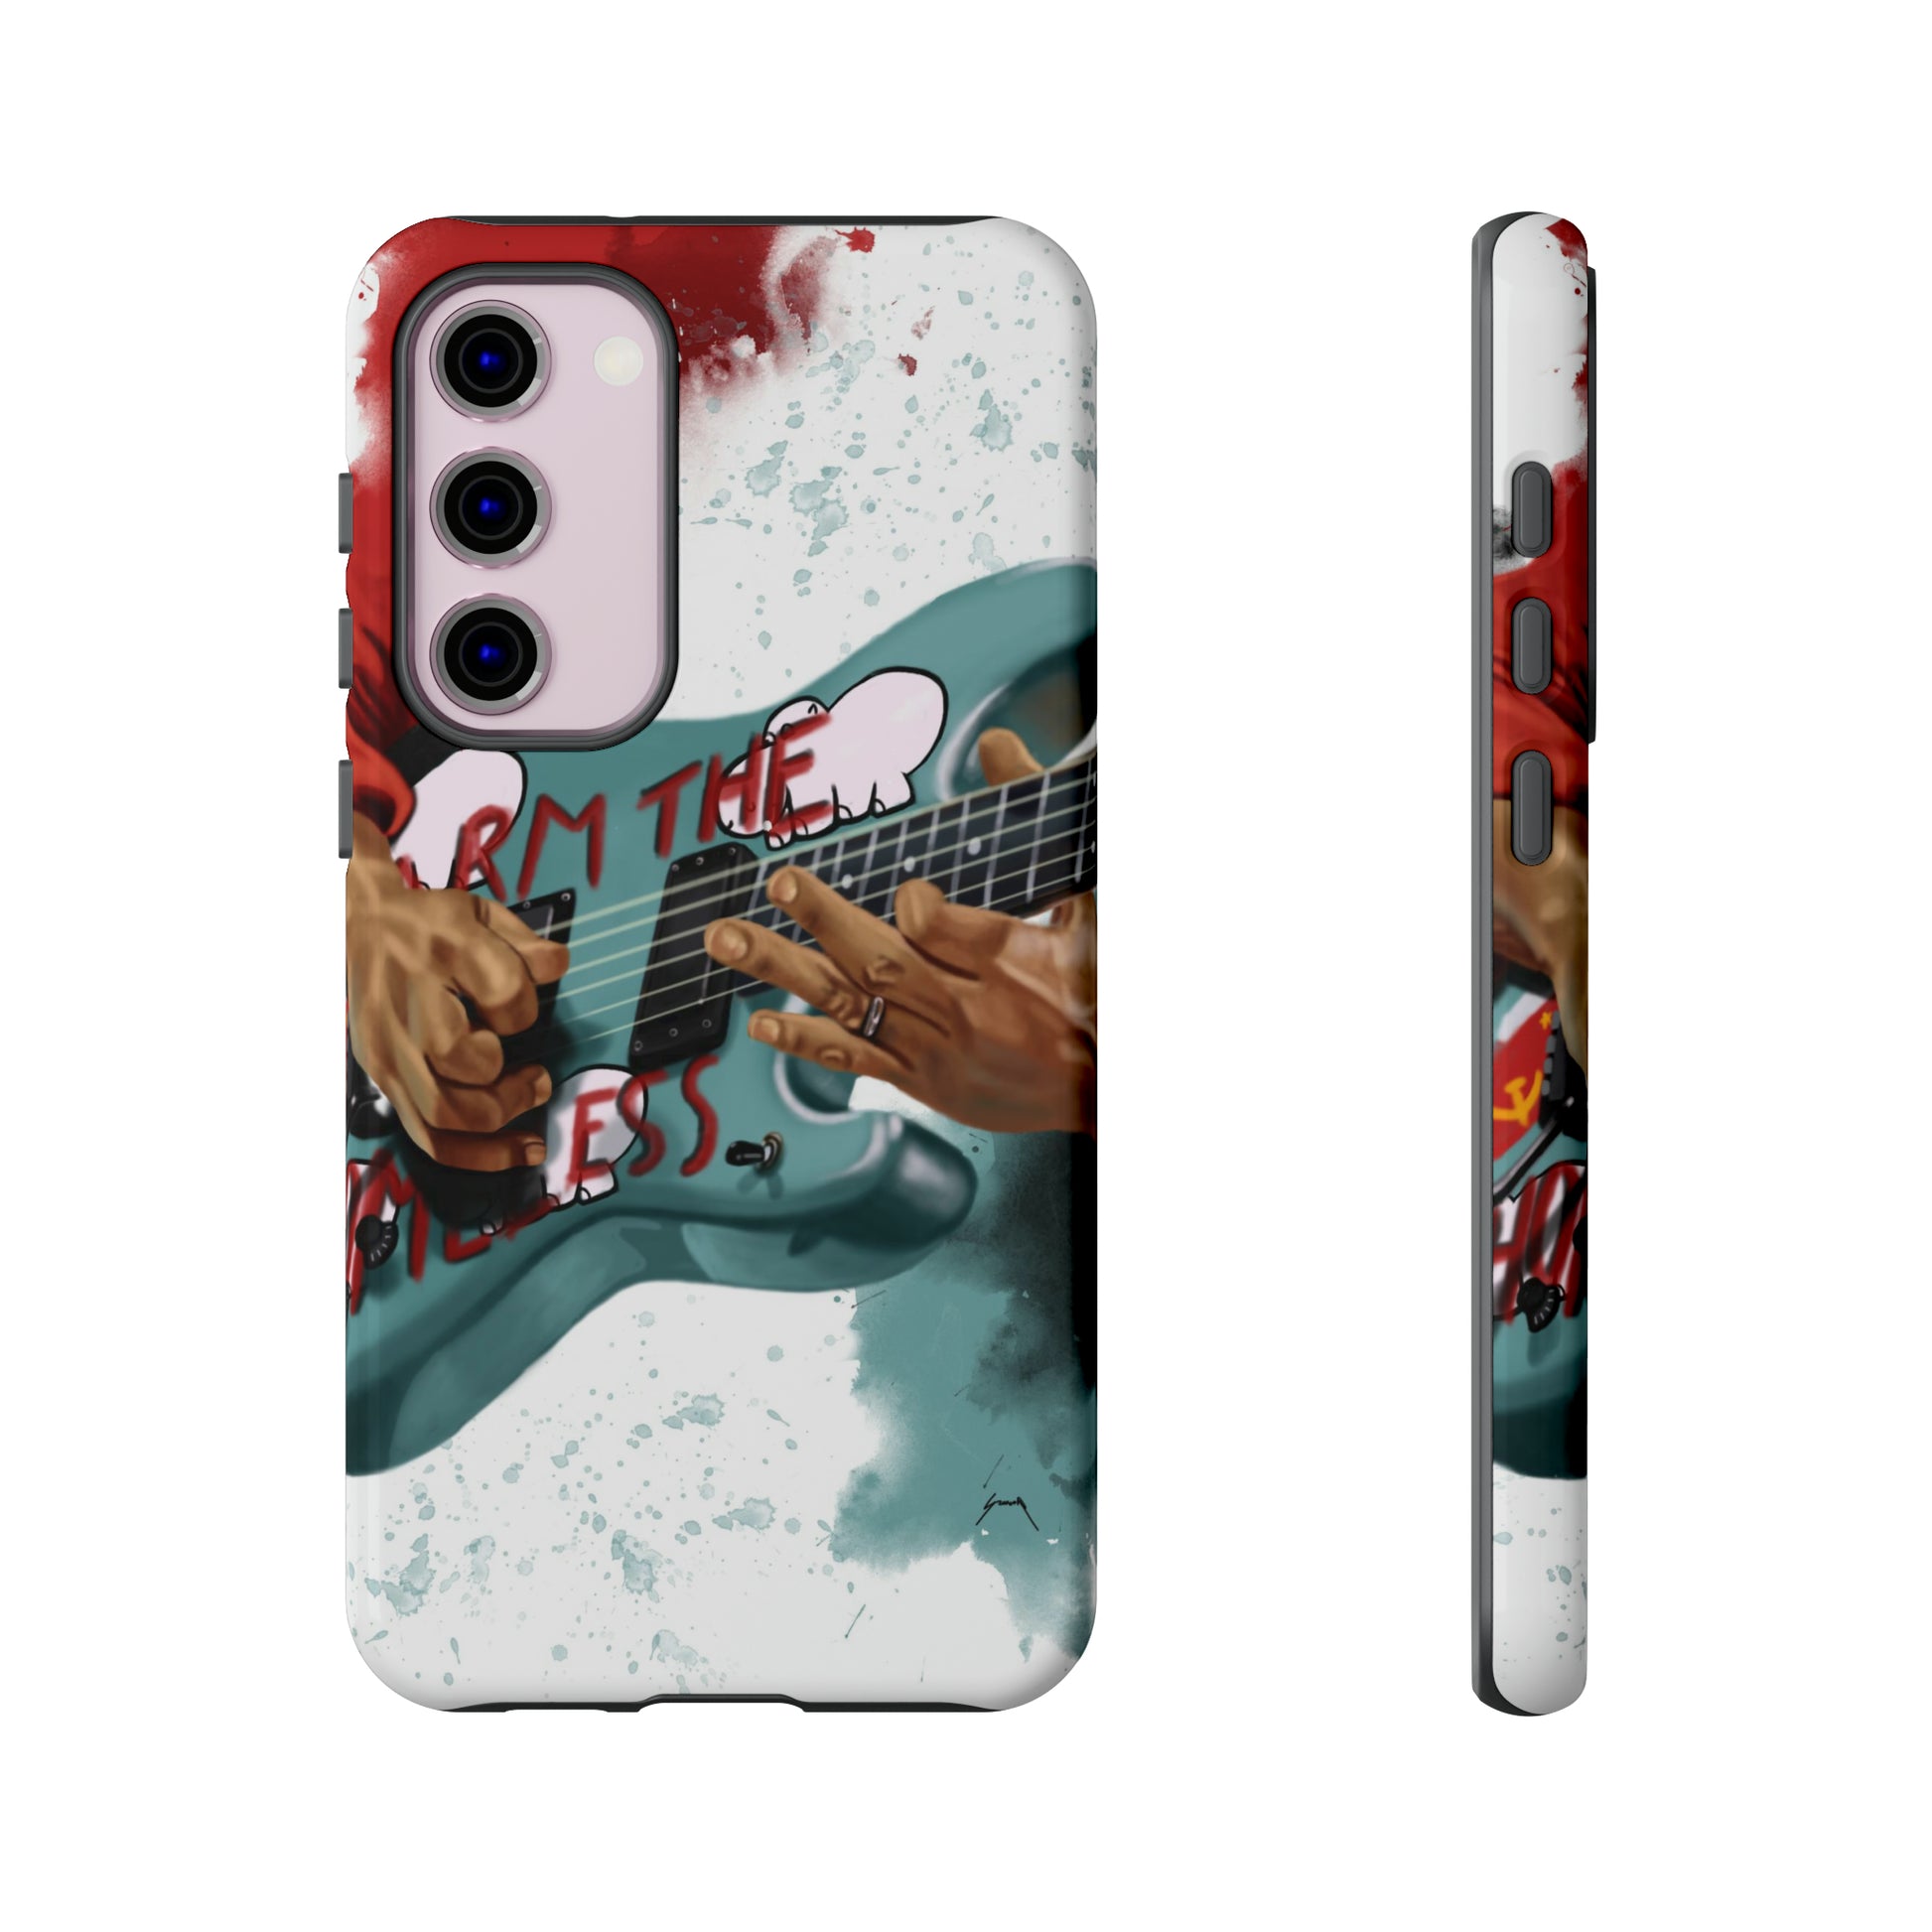 Digital painting of a blue electric guitar with stickers and hands printed on samsung phone case